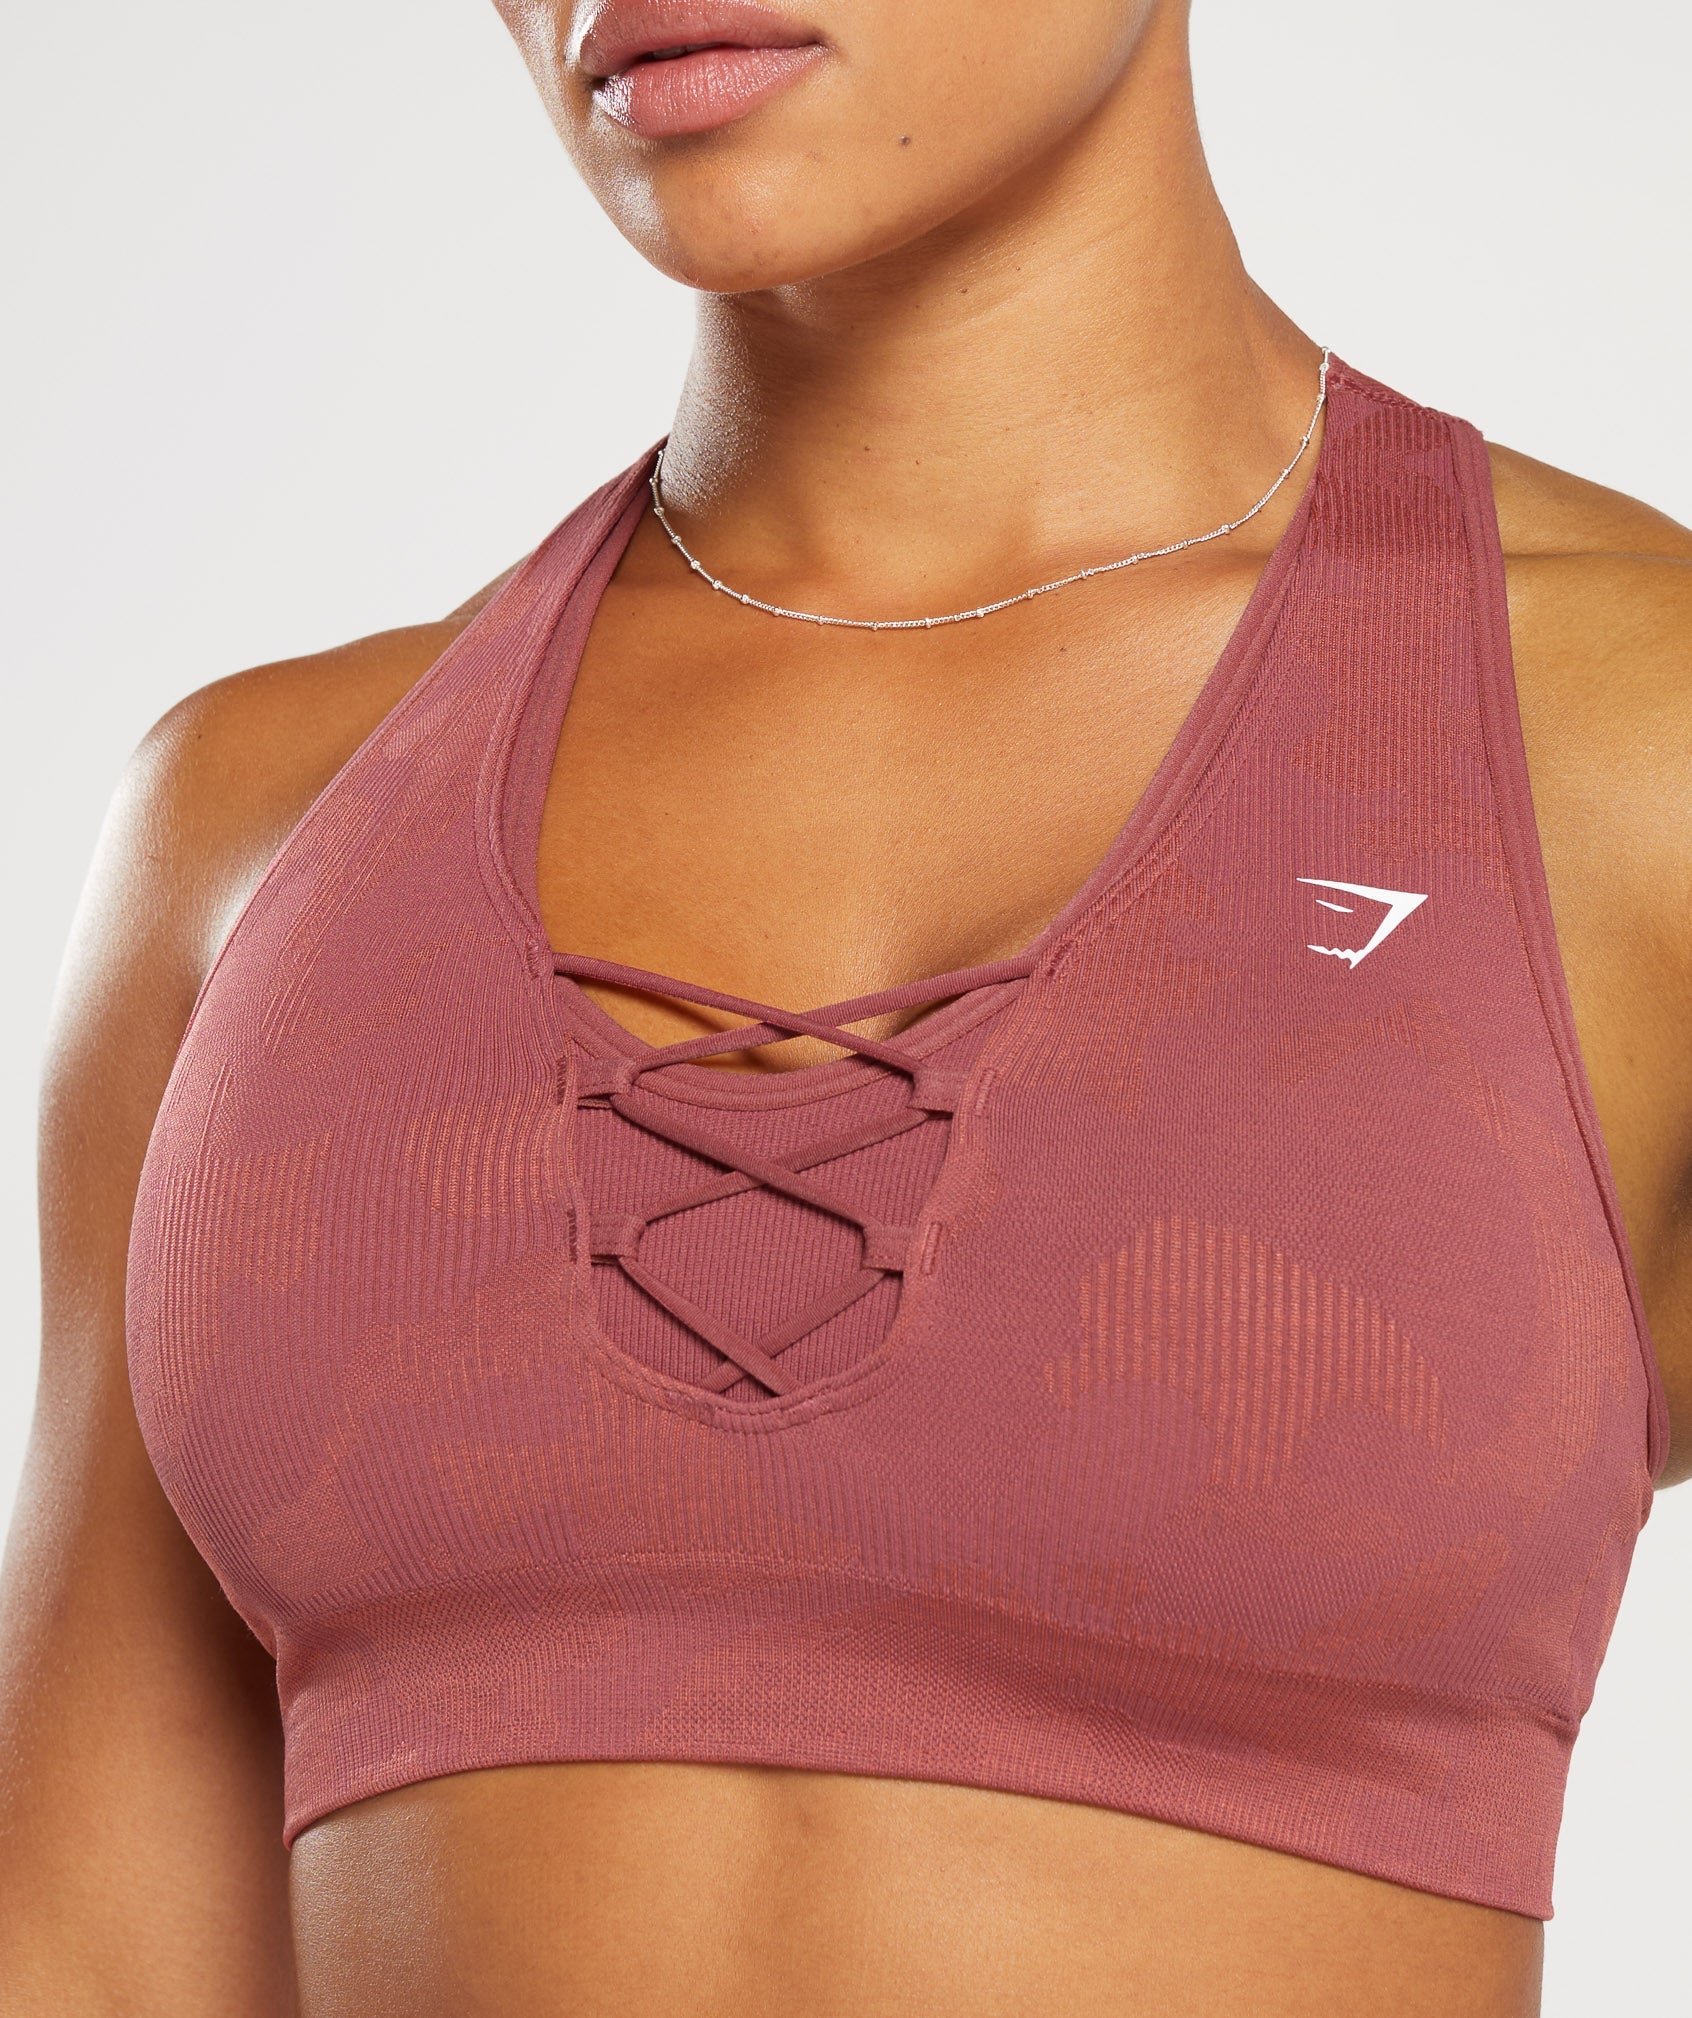 Adapt Camo Seamless Ribbed Sports Bra in Soft Berry/Sunbaked Pink - view 5